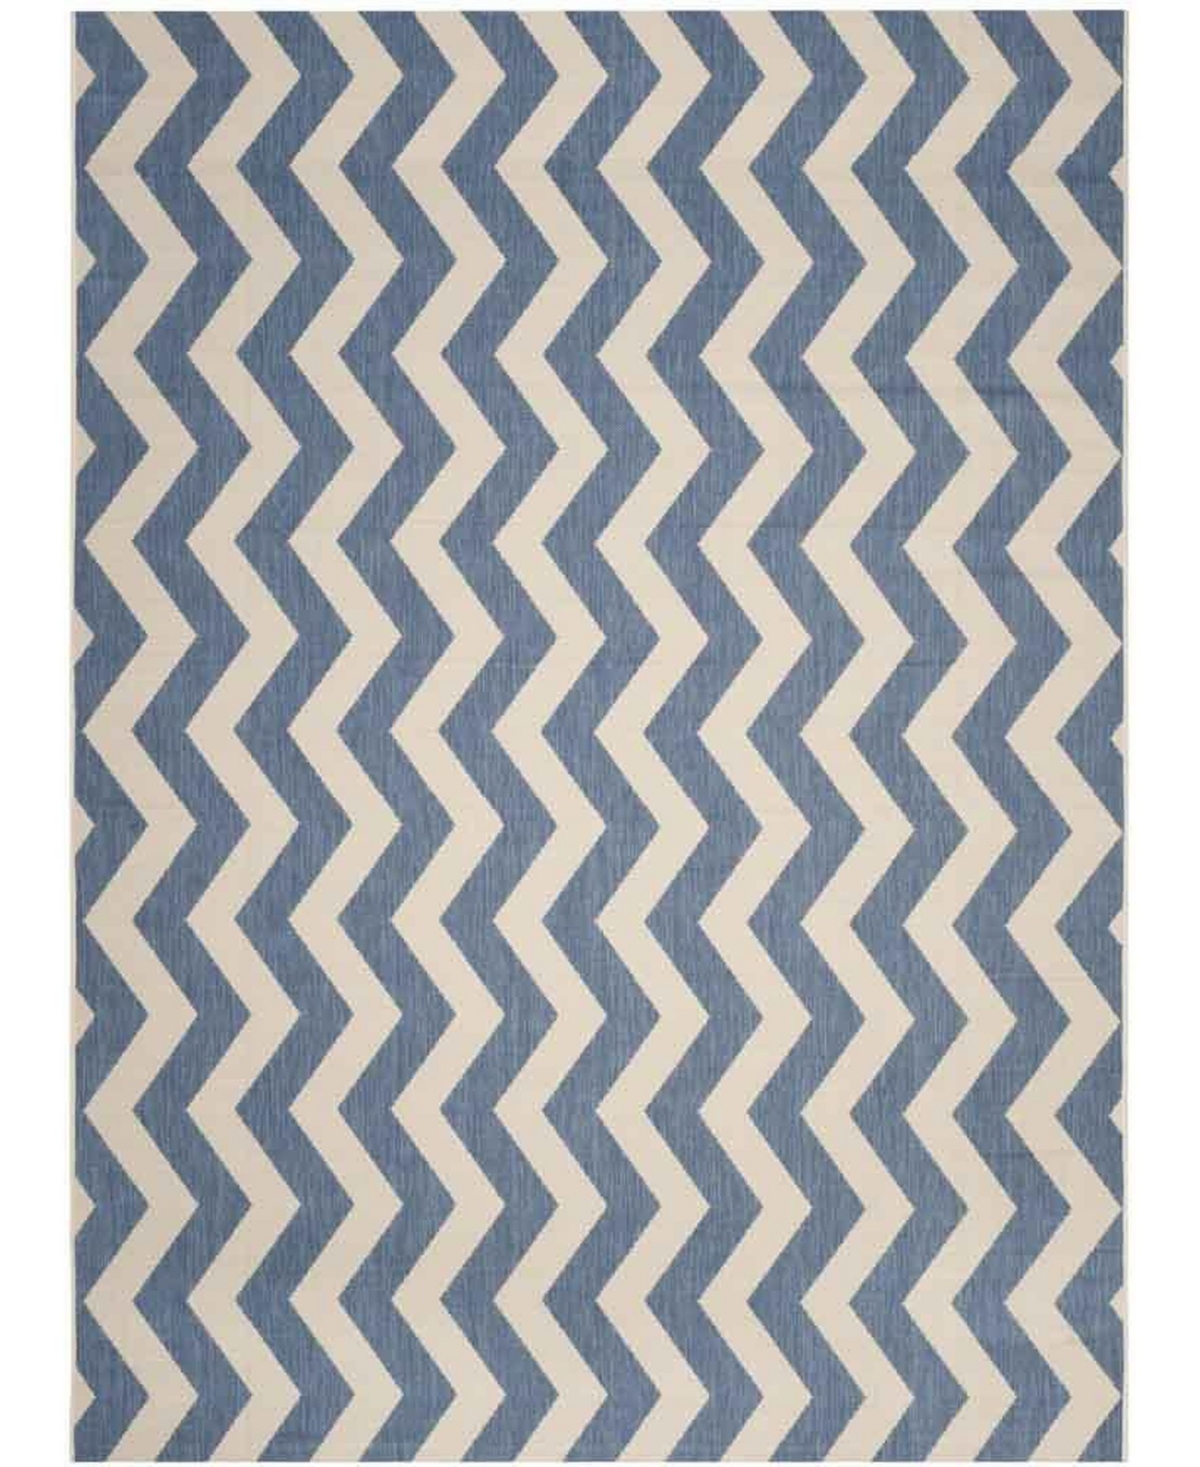 Safavieh Courtyard Blue and Beige 8'11in x 12' Sisal Weave Rectangle Outdoor Area Rug - Blue / Bei